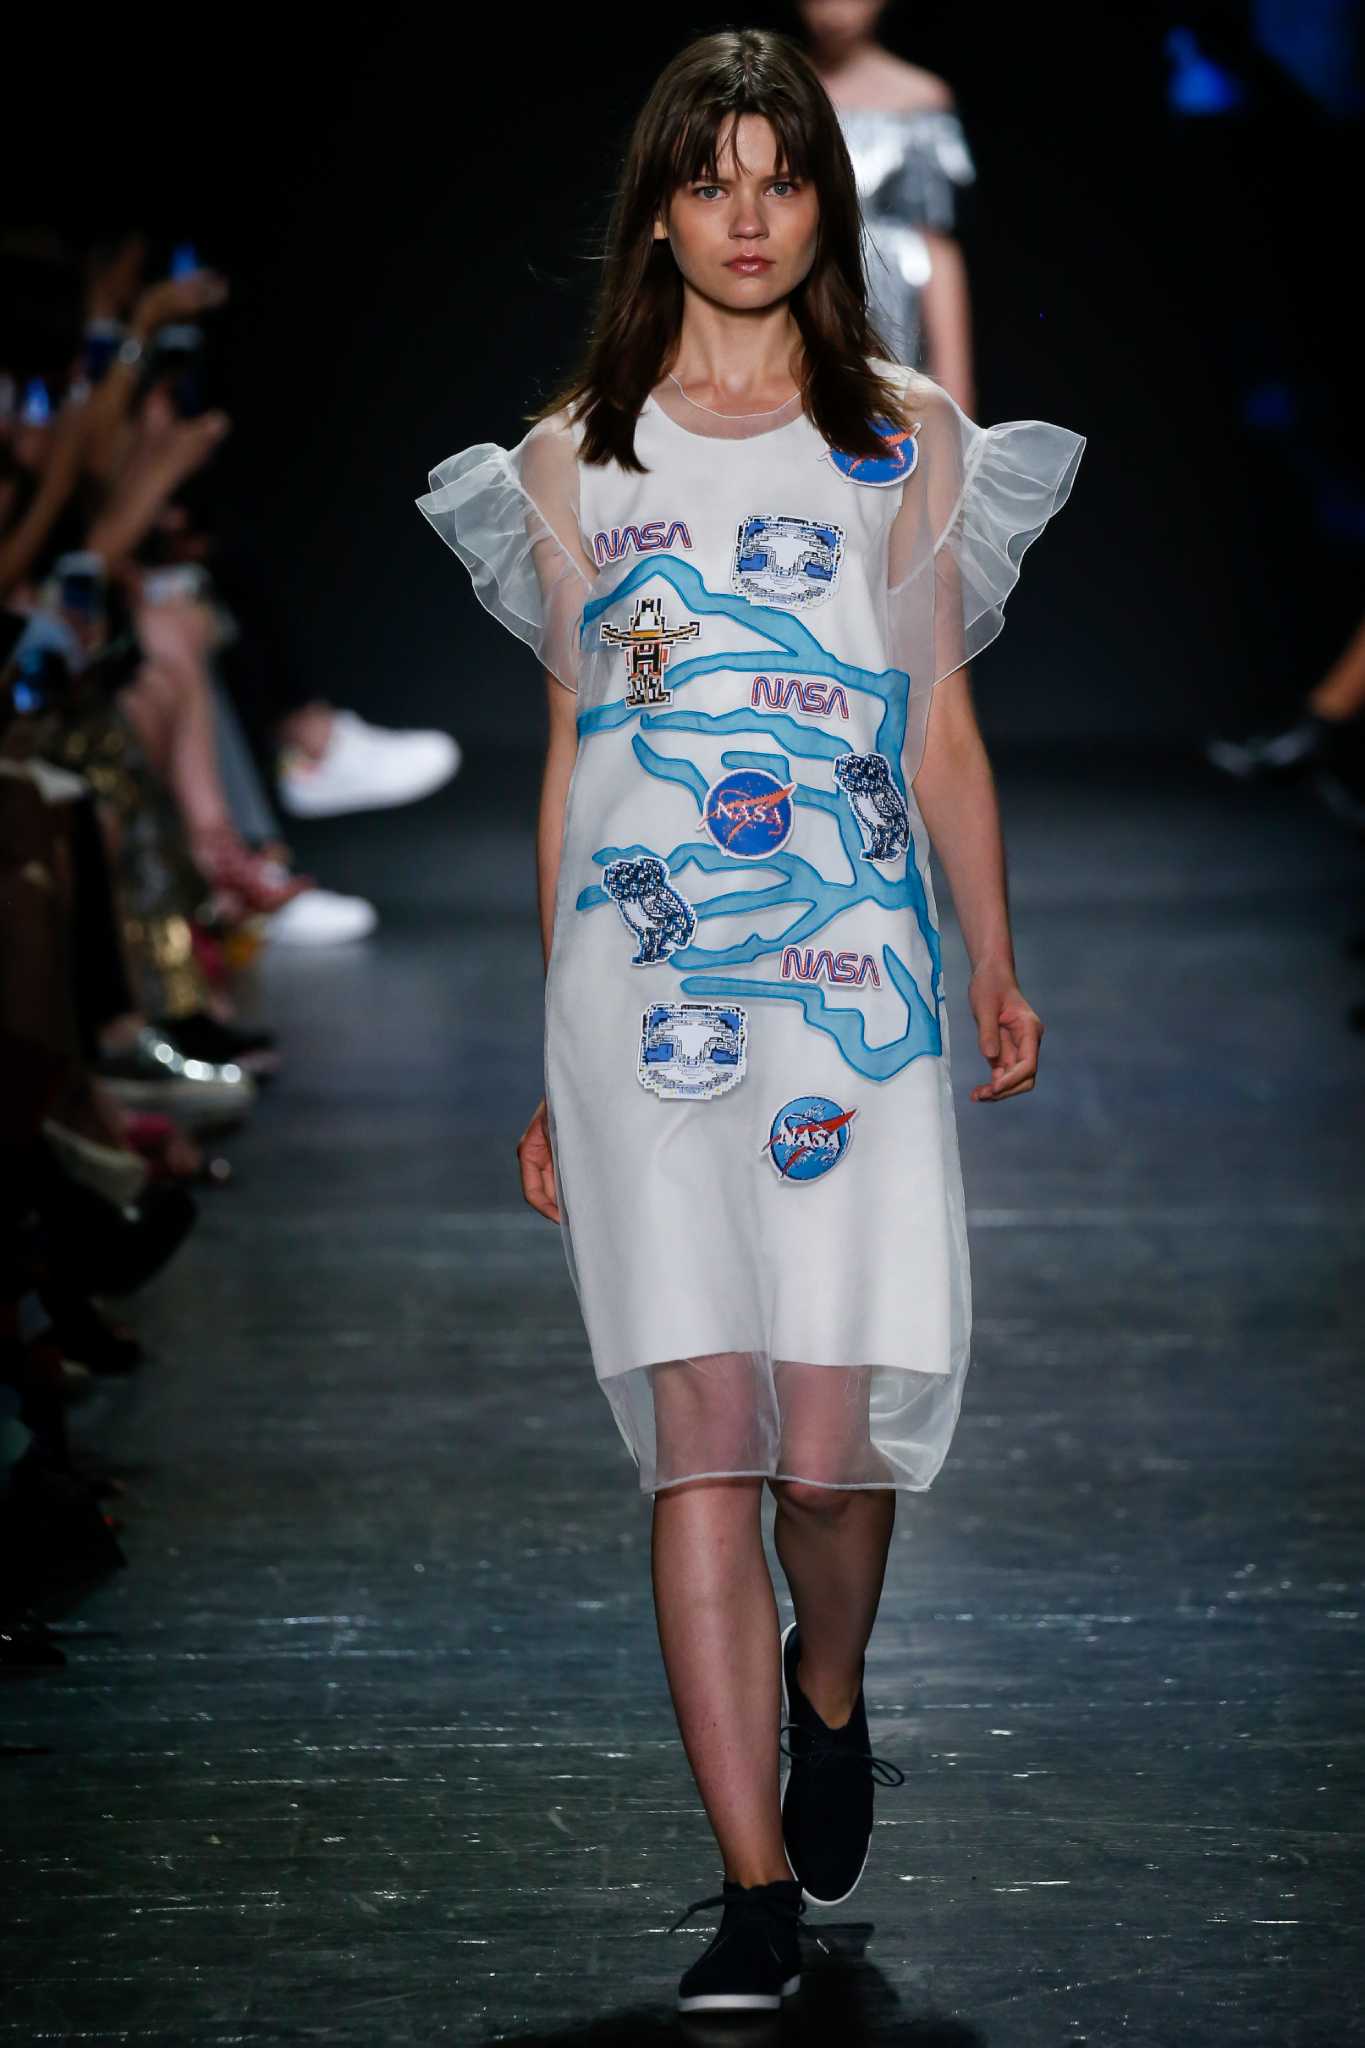 Vivienne Tam shows Houston-themed collection at NYFW